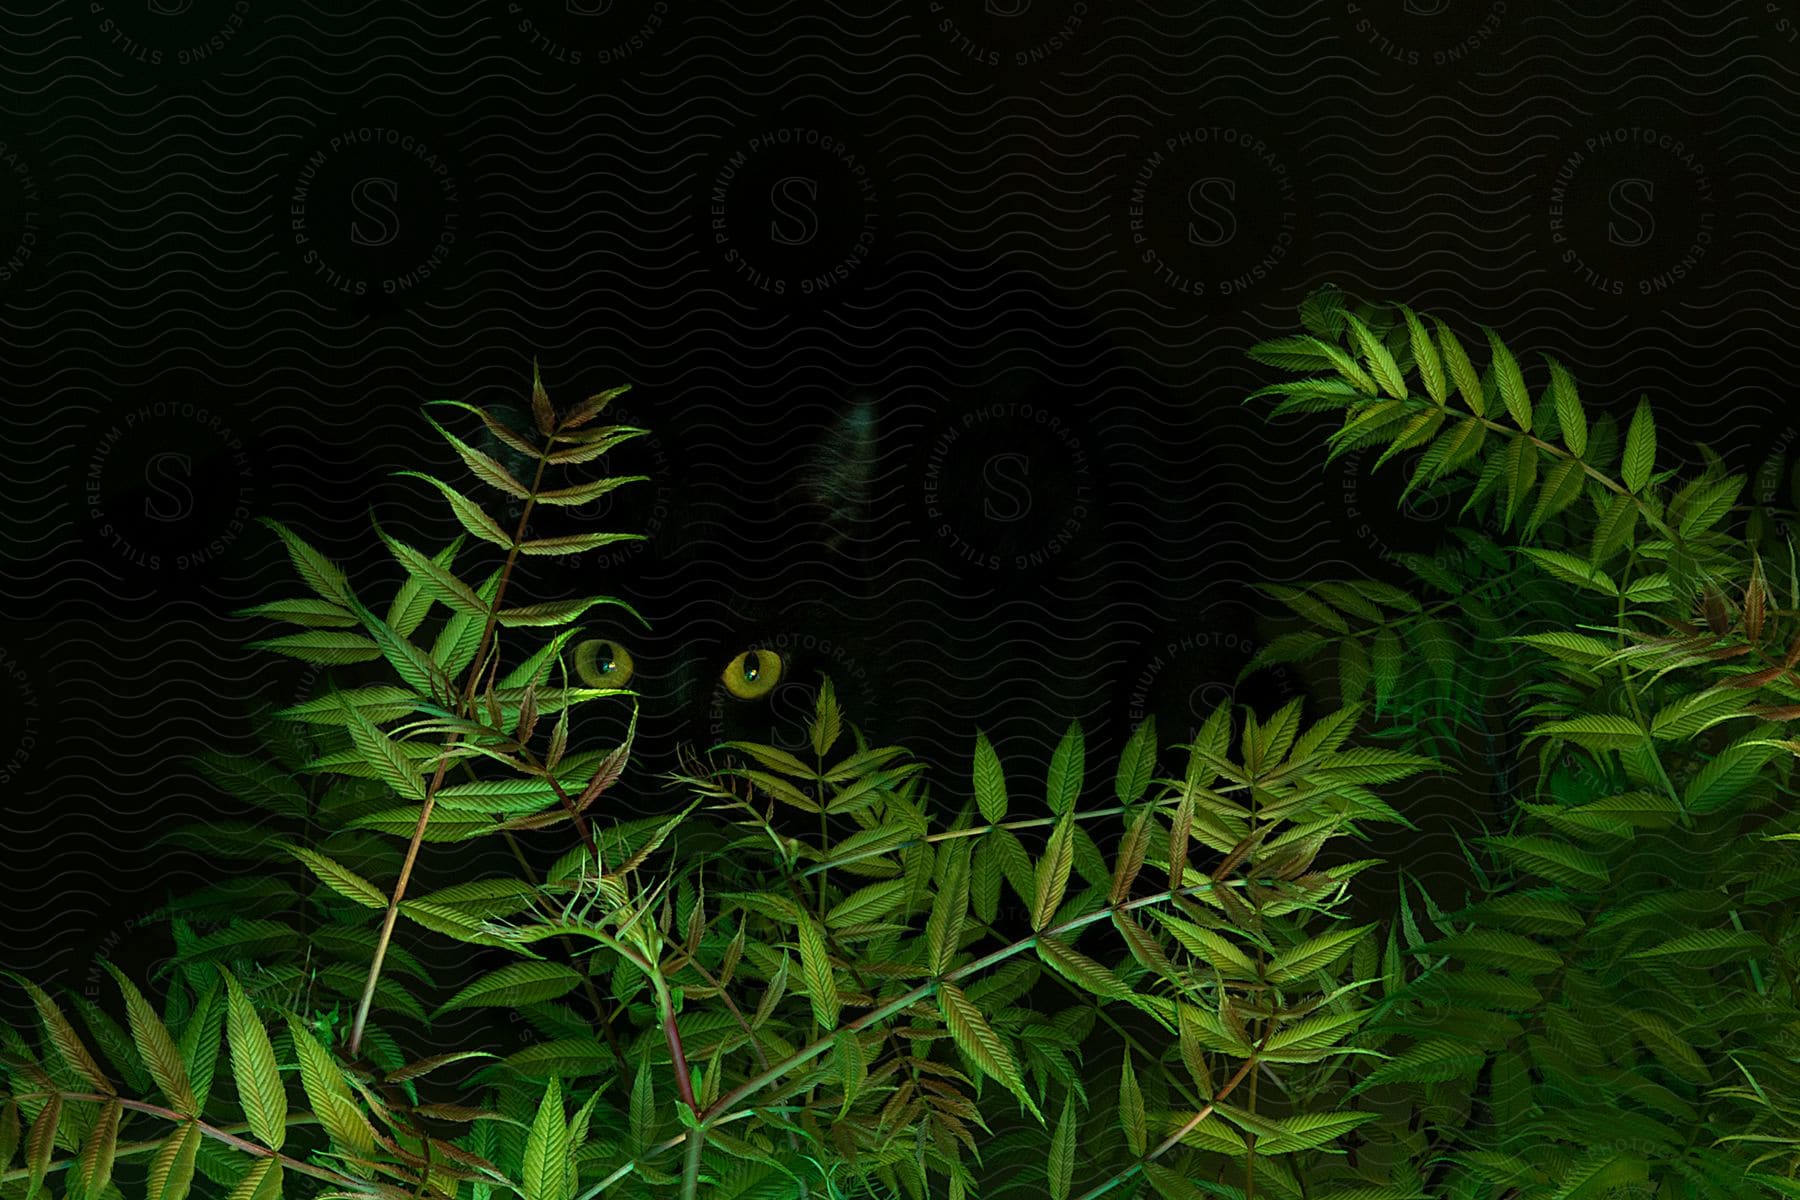 Stock photo of light shines on tropical plants in the darkness